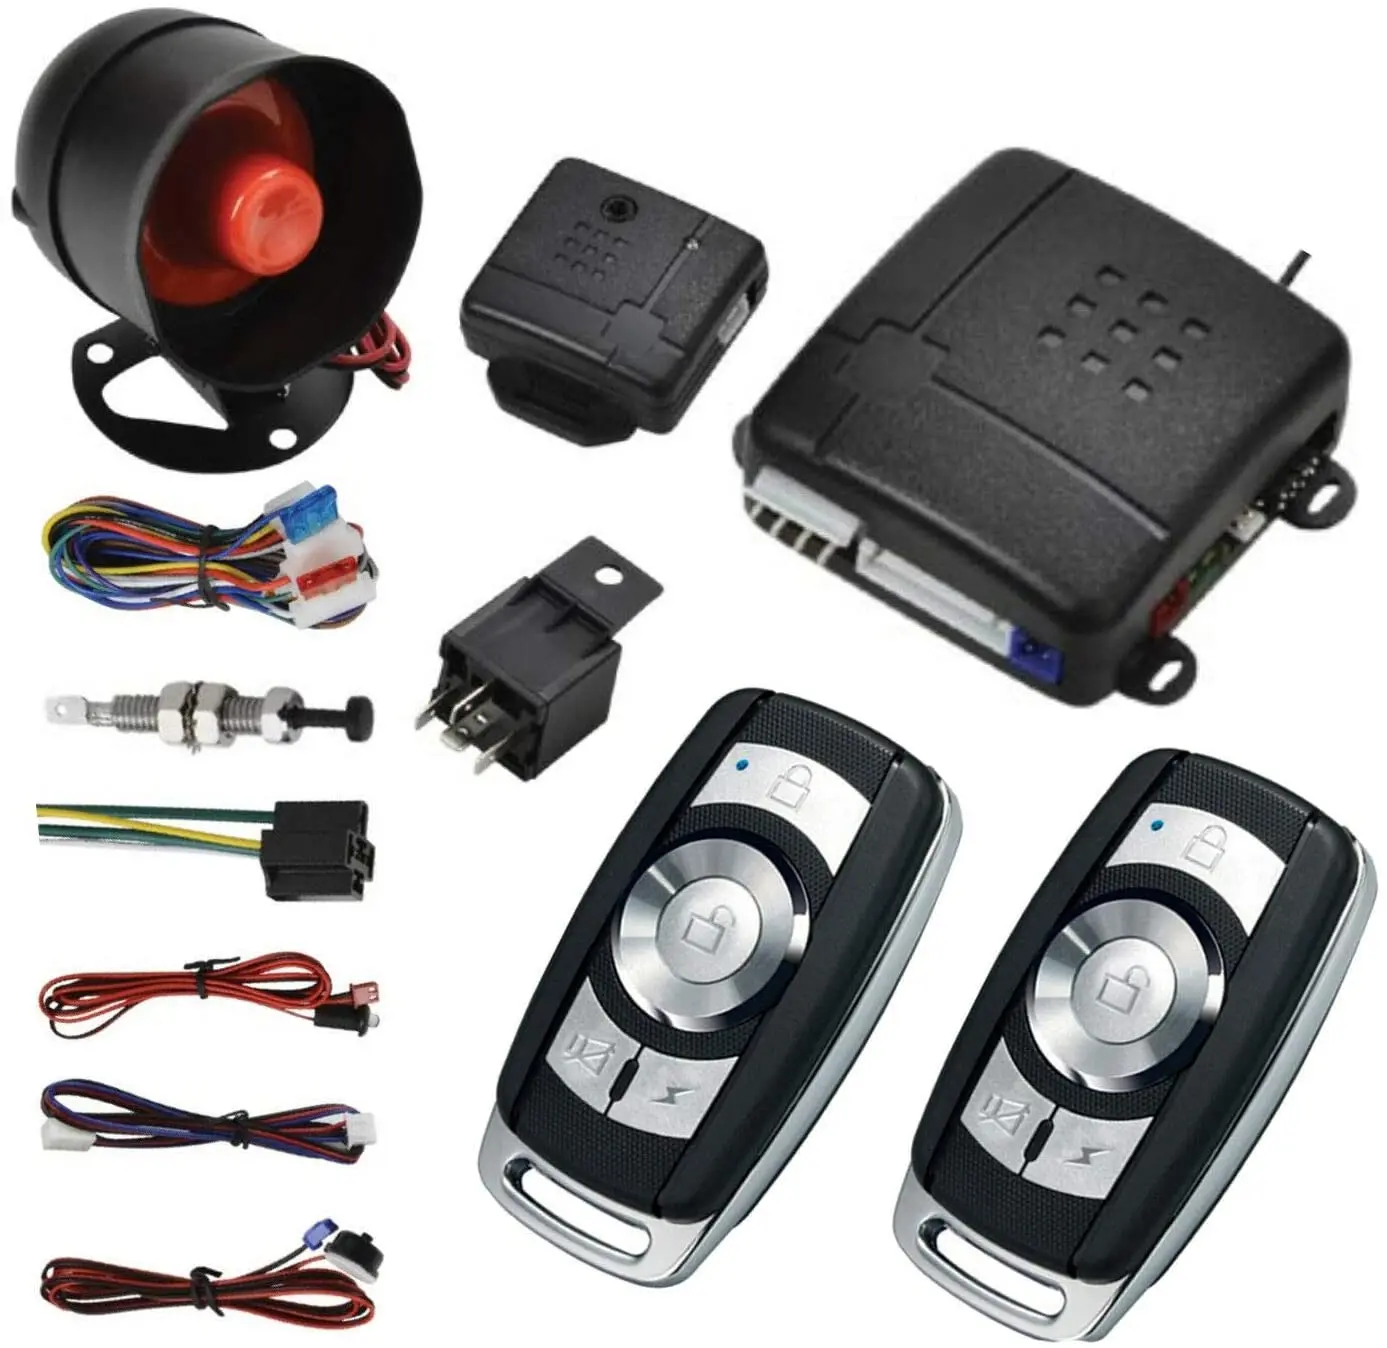 

Car Central Lock Universal Auto Remote Central Kit Vehicle Door Lock with Shock Sensor and 2 Replacement Remote Contorl